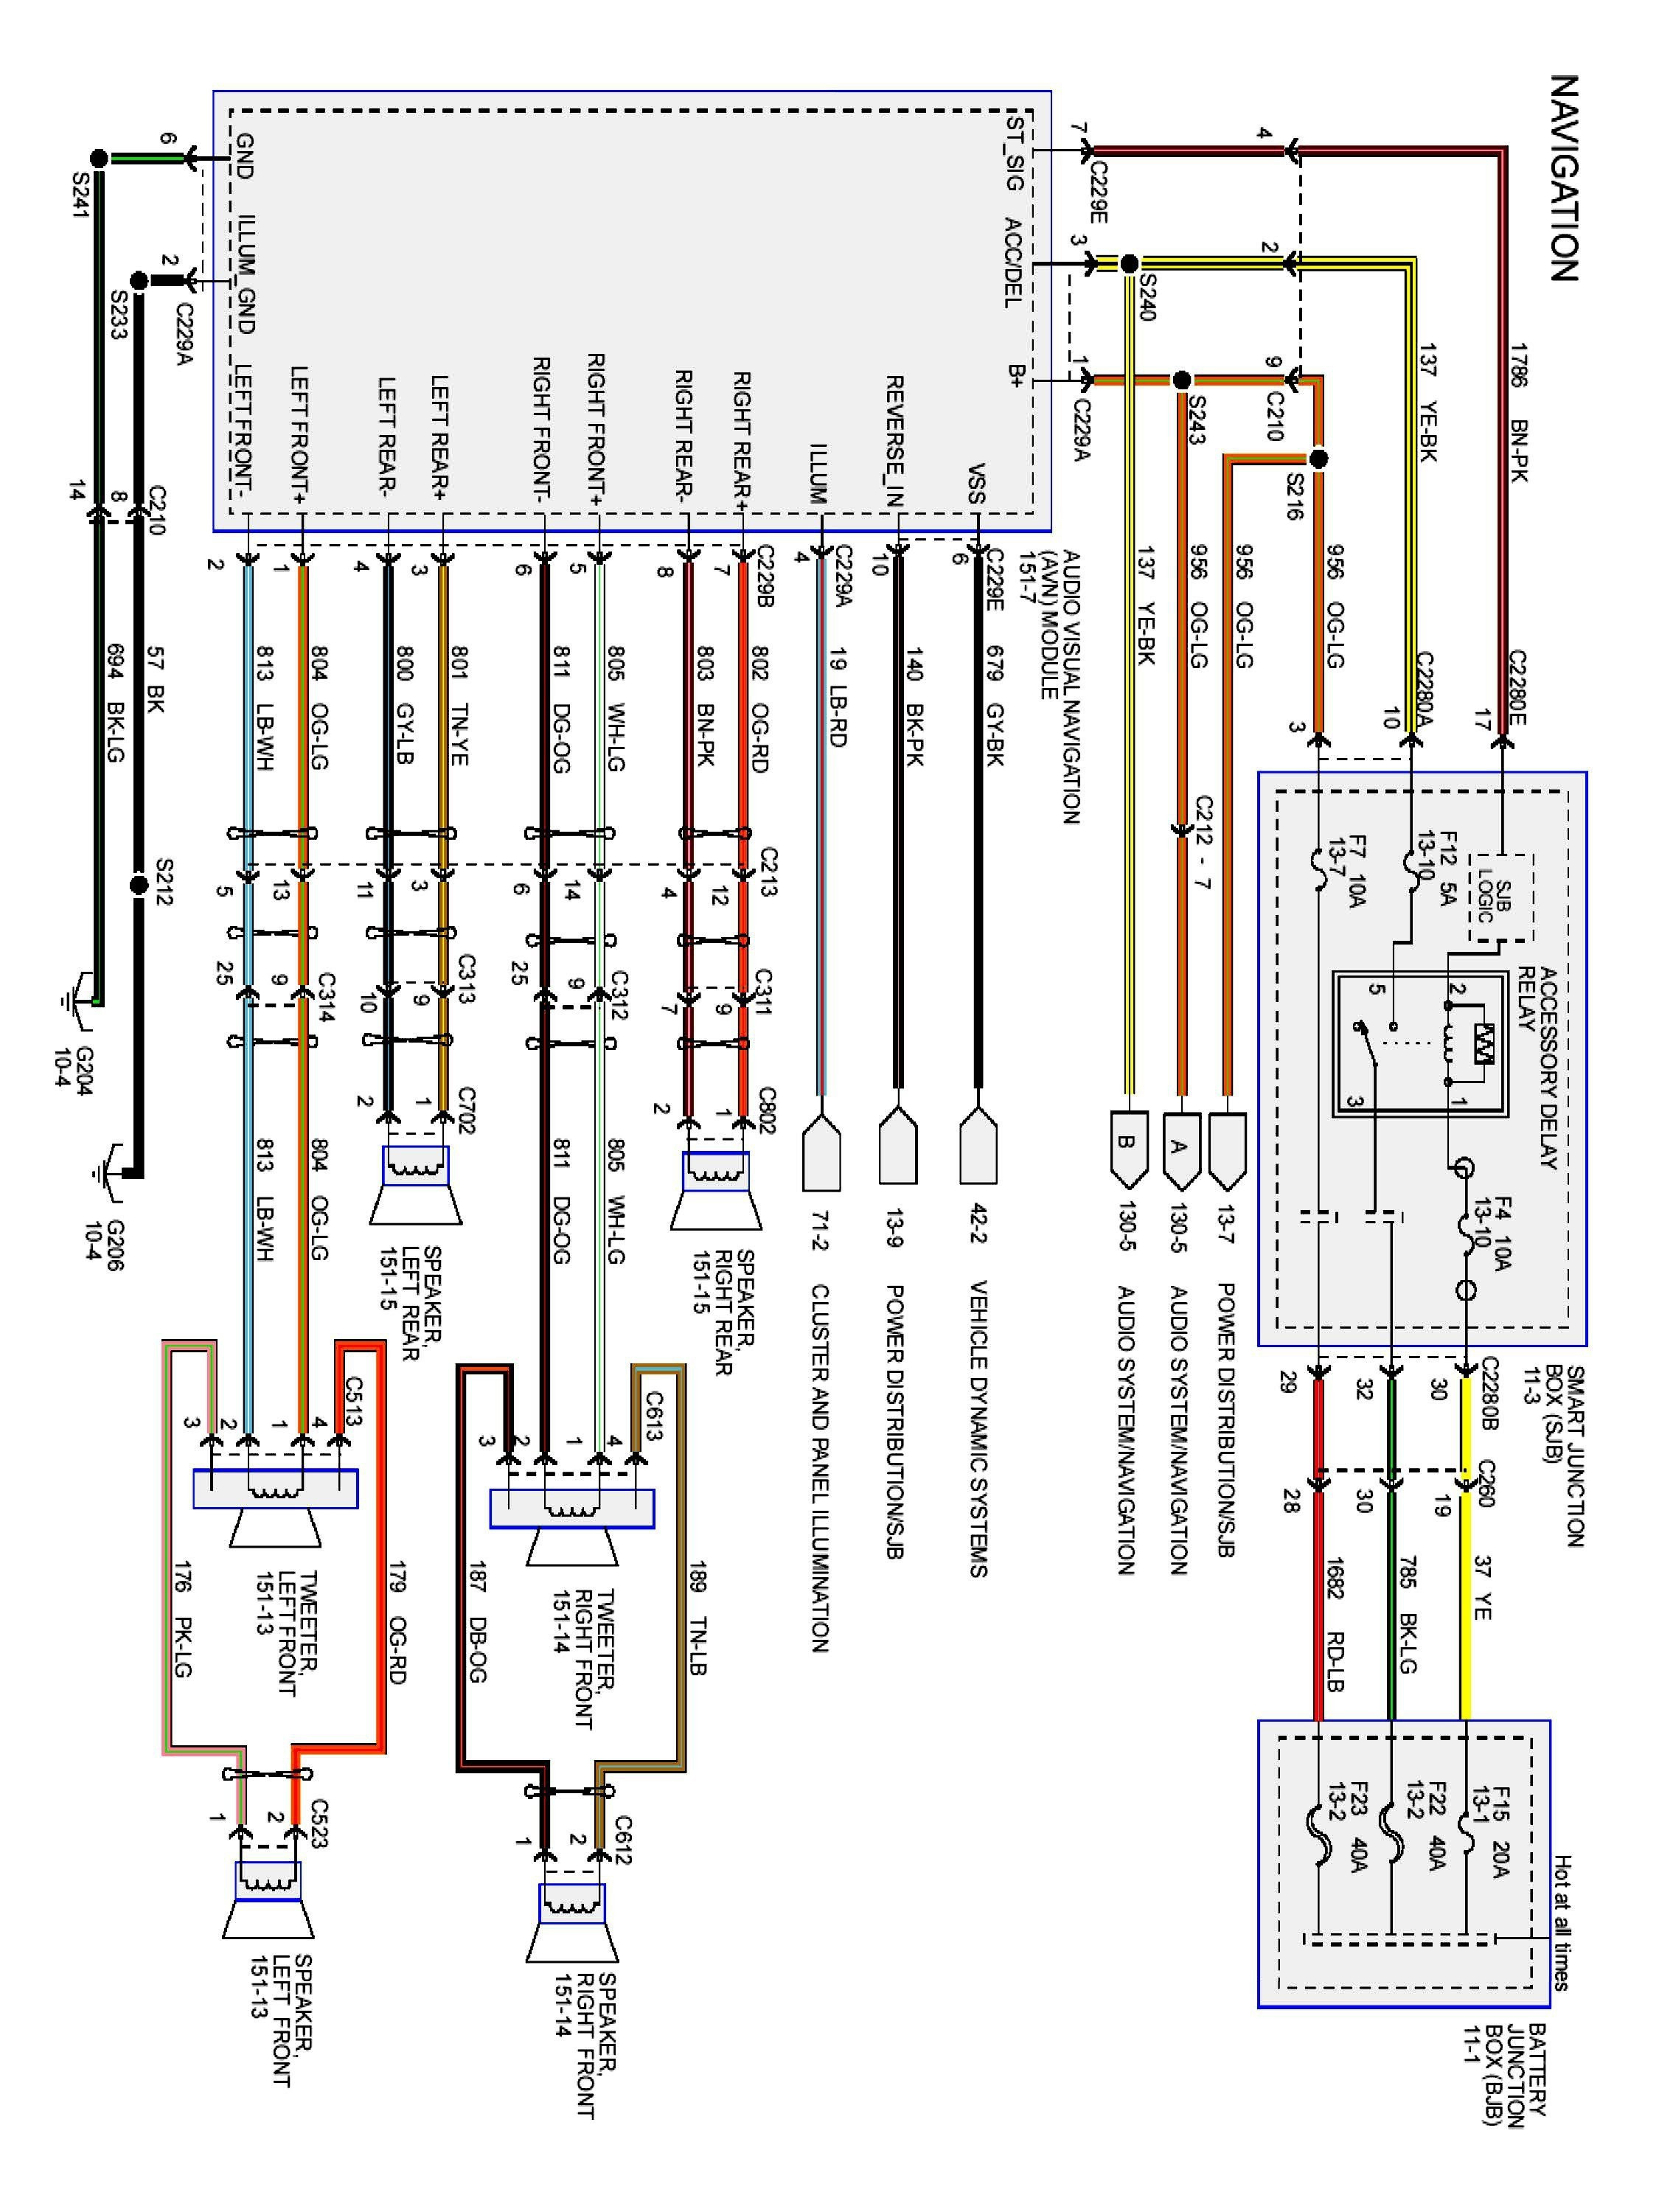 1995 Ford F150 Radio Wiring Diagram Example Of 2001 Ford F250 Radio - Ford F150 Radio Wiring Harness Diagram